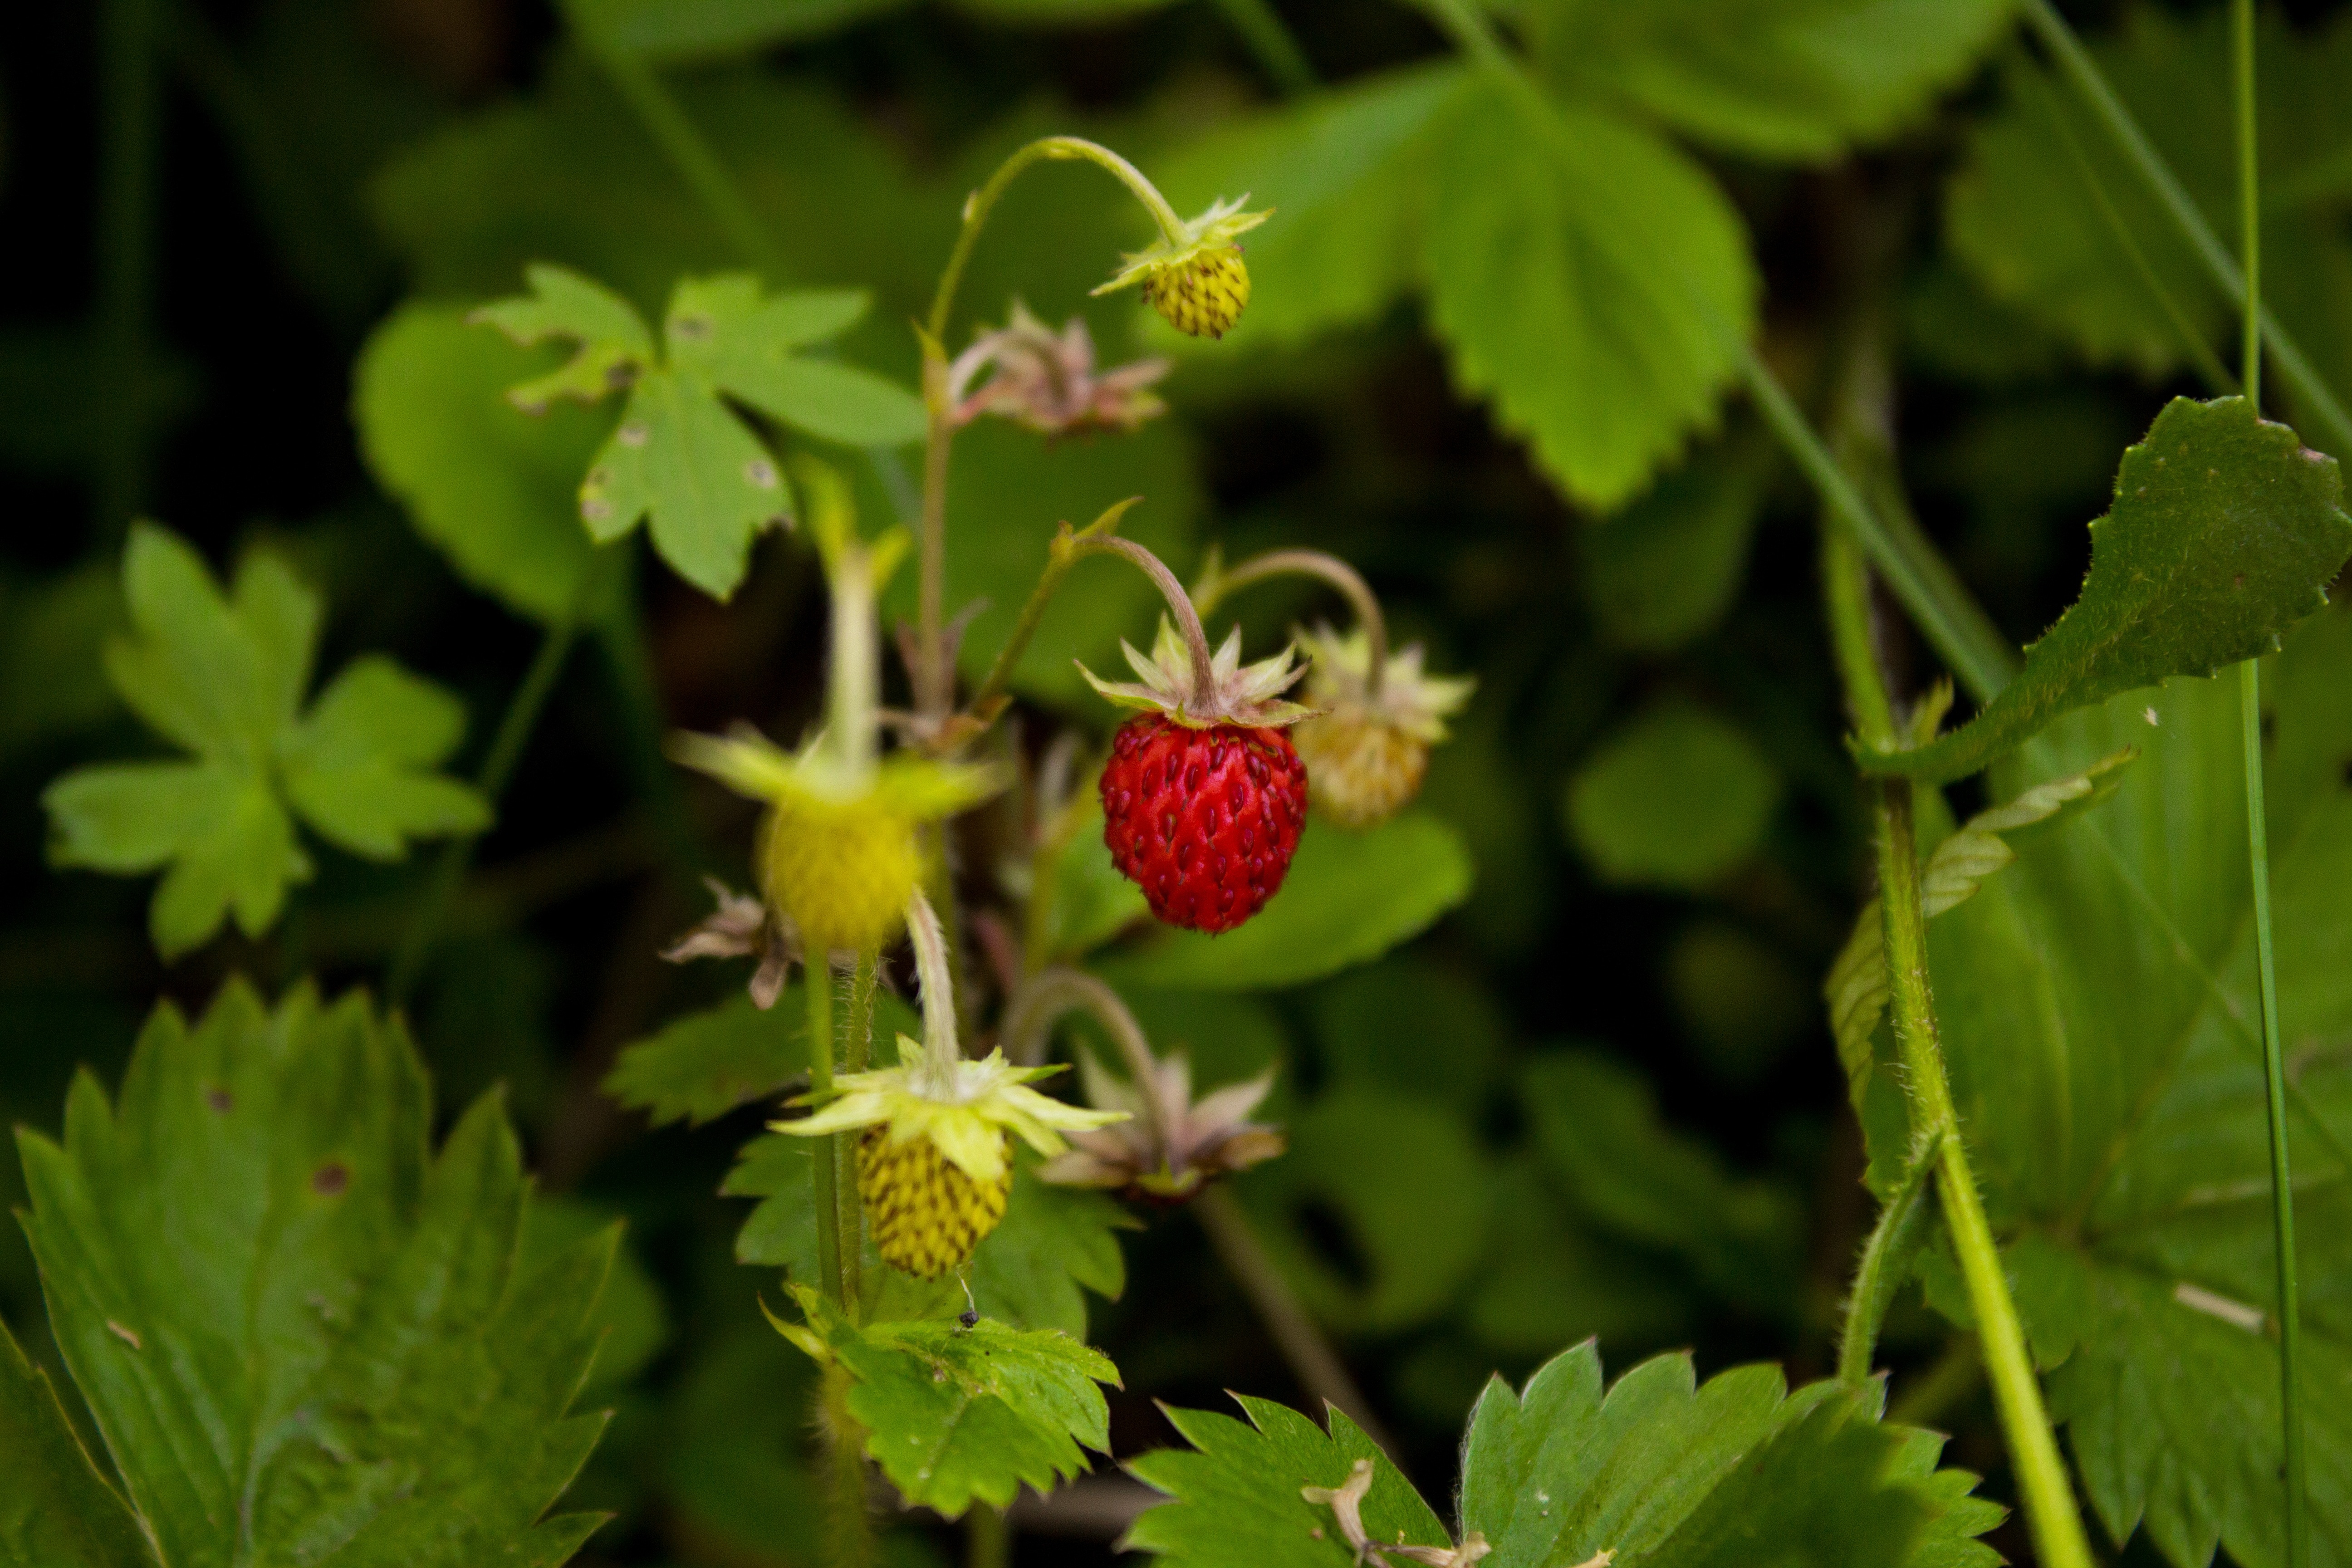 Wild Strawberry, Woodland Strawberry, fruit, green color